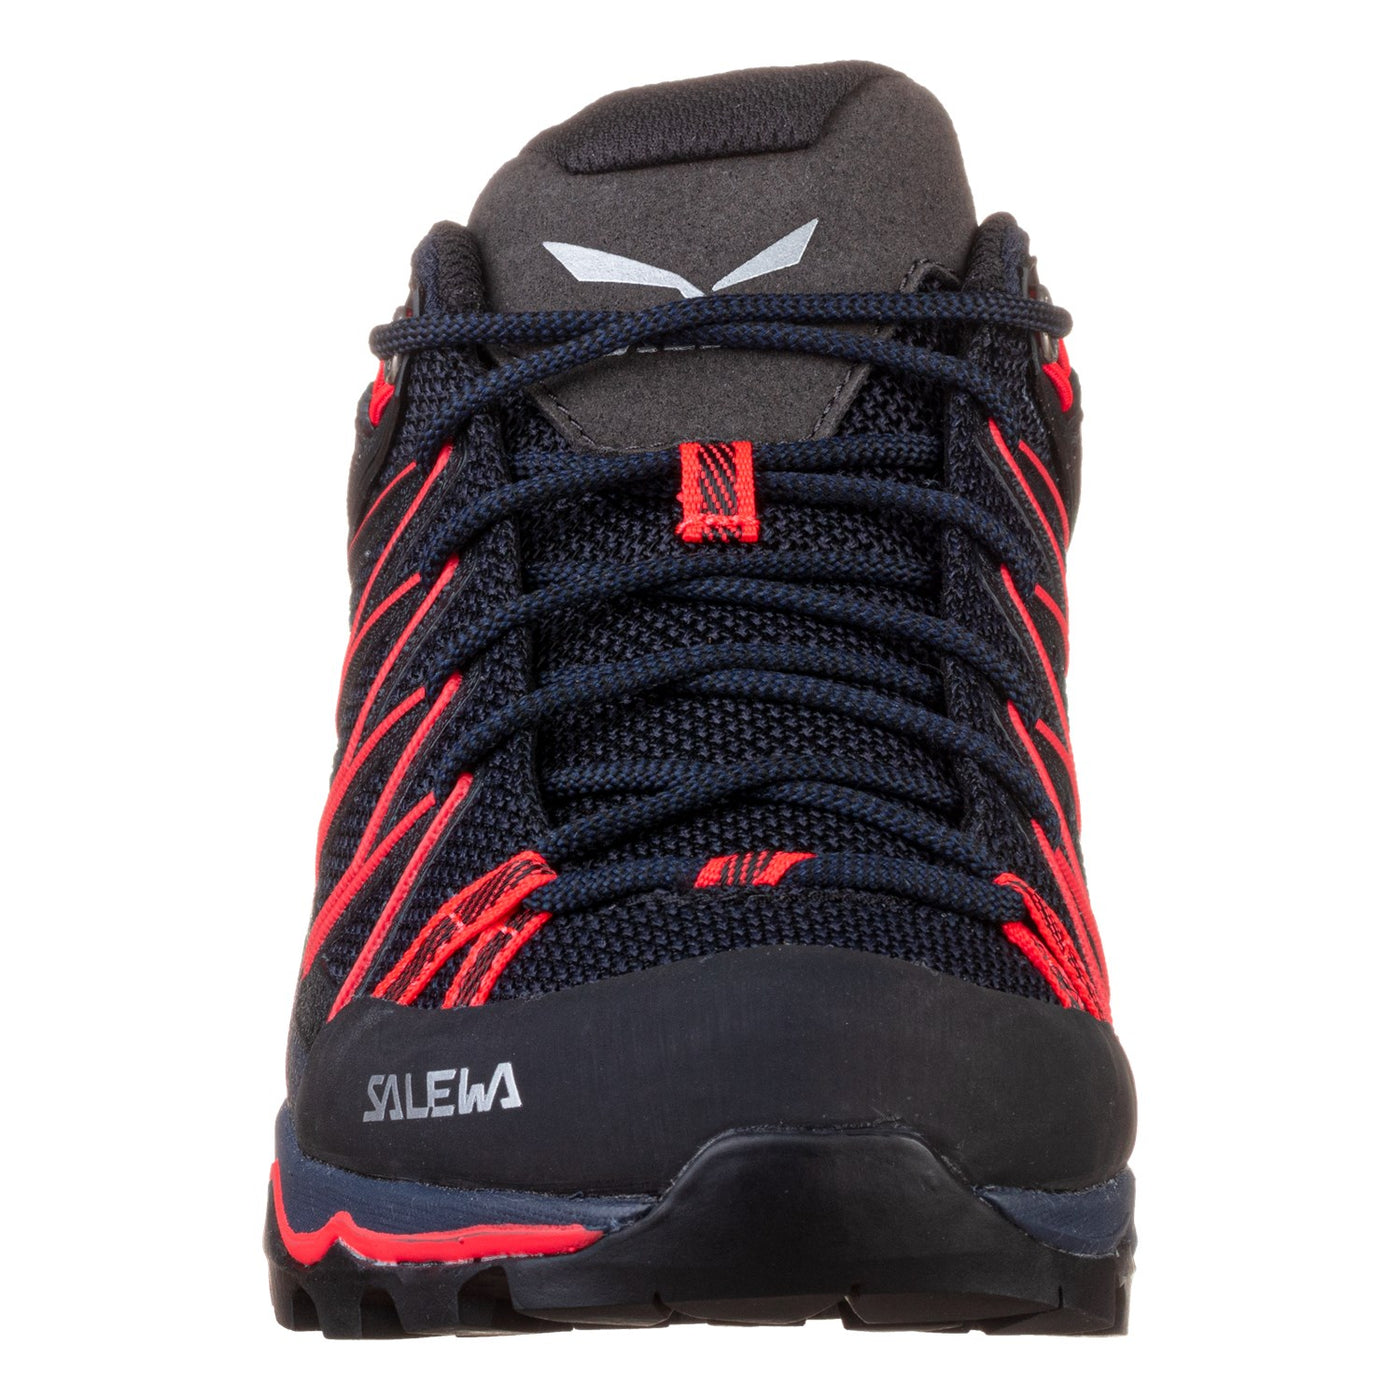 Salewa Mountain Trainer Lite - Womens | Hiking and Approach Shoes | NZ